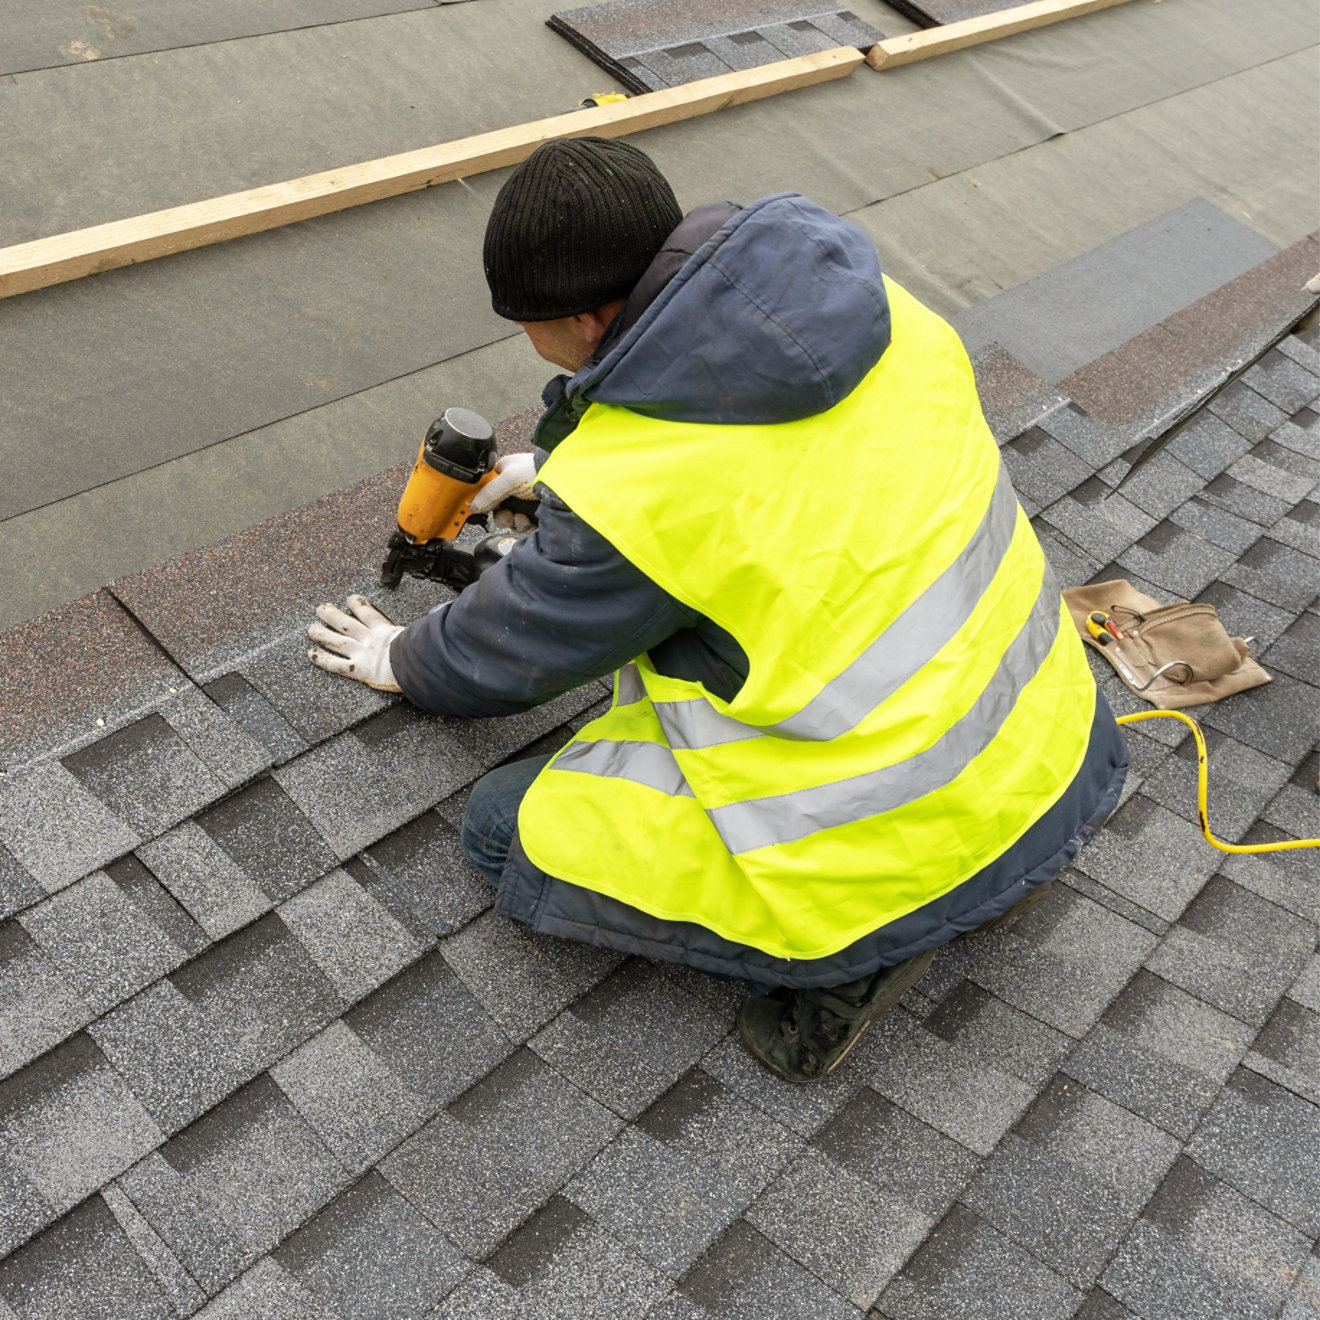 A man in a high-vis jacket working on a tiled roof